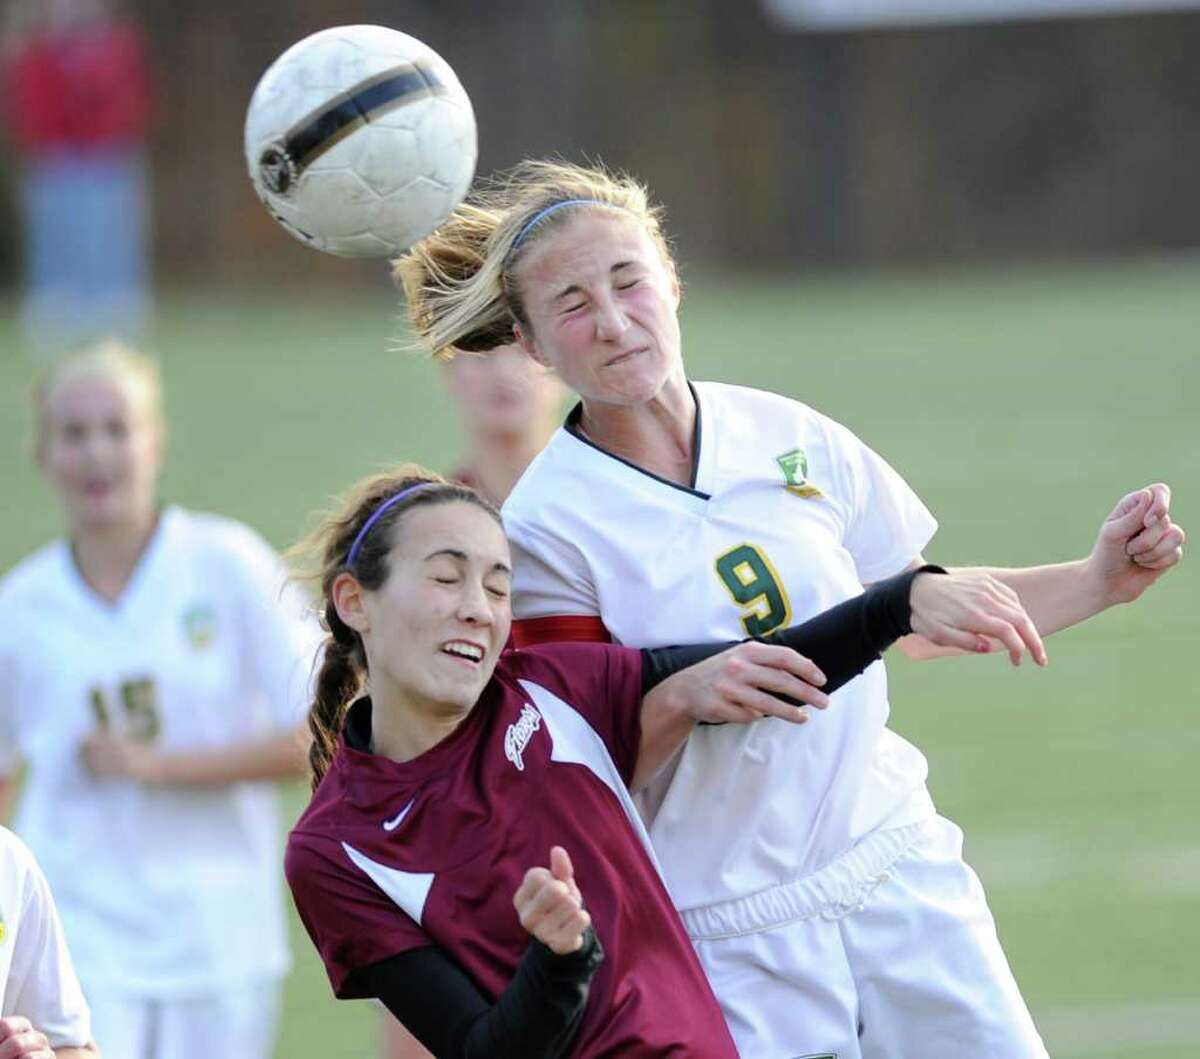 Caroline Parsons, left, # 15 of St, Luke's School, goes for the header along with Sarah Whylly, # 9 of Greenwich Academy during the FAA girls soccer championship between St. Luke's School and Greenwich Academy at St. Luke's, New Canaan, Nov.11, 2011.